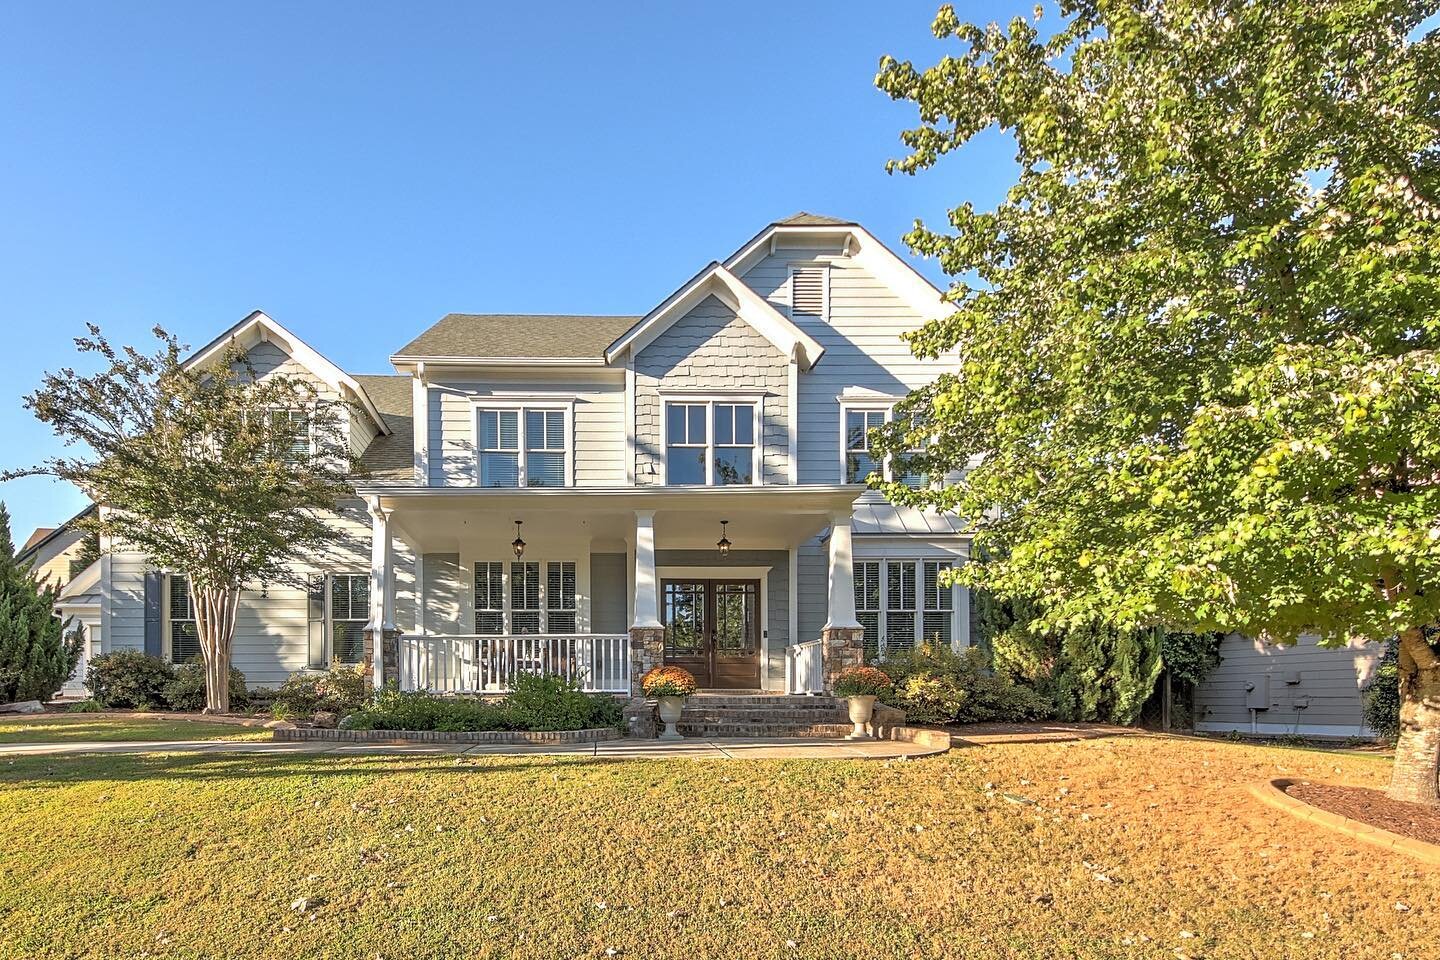 Just listed in Westbrook Park! ✨ Both charming and elegant, spacious + serene, this one is truly the total package! Walking distance to North Cooper Lake Park and West Smyrna Swim &amp; Tennis Club, this home boasts 5 bedrooms + 4 baths, a media room